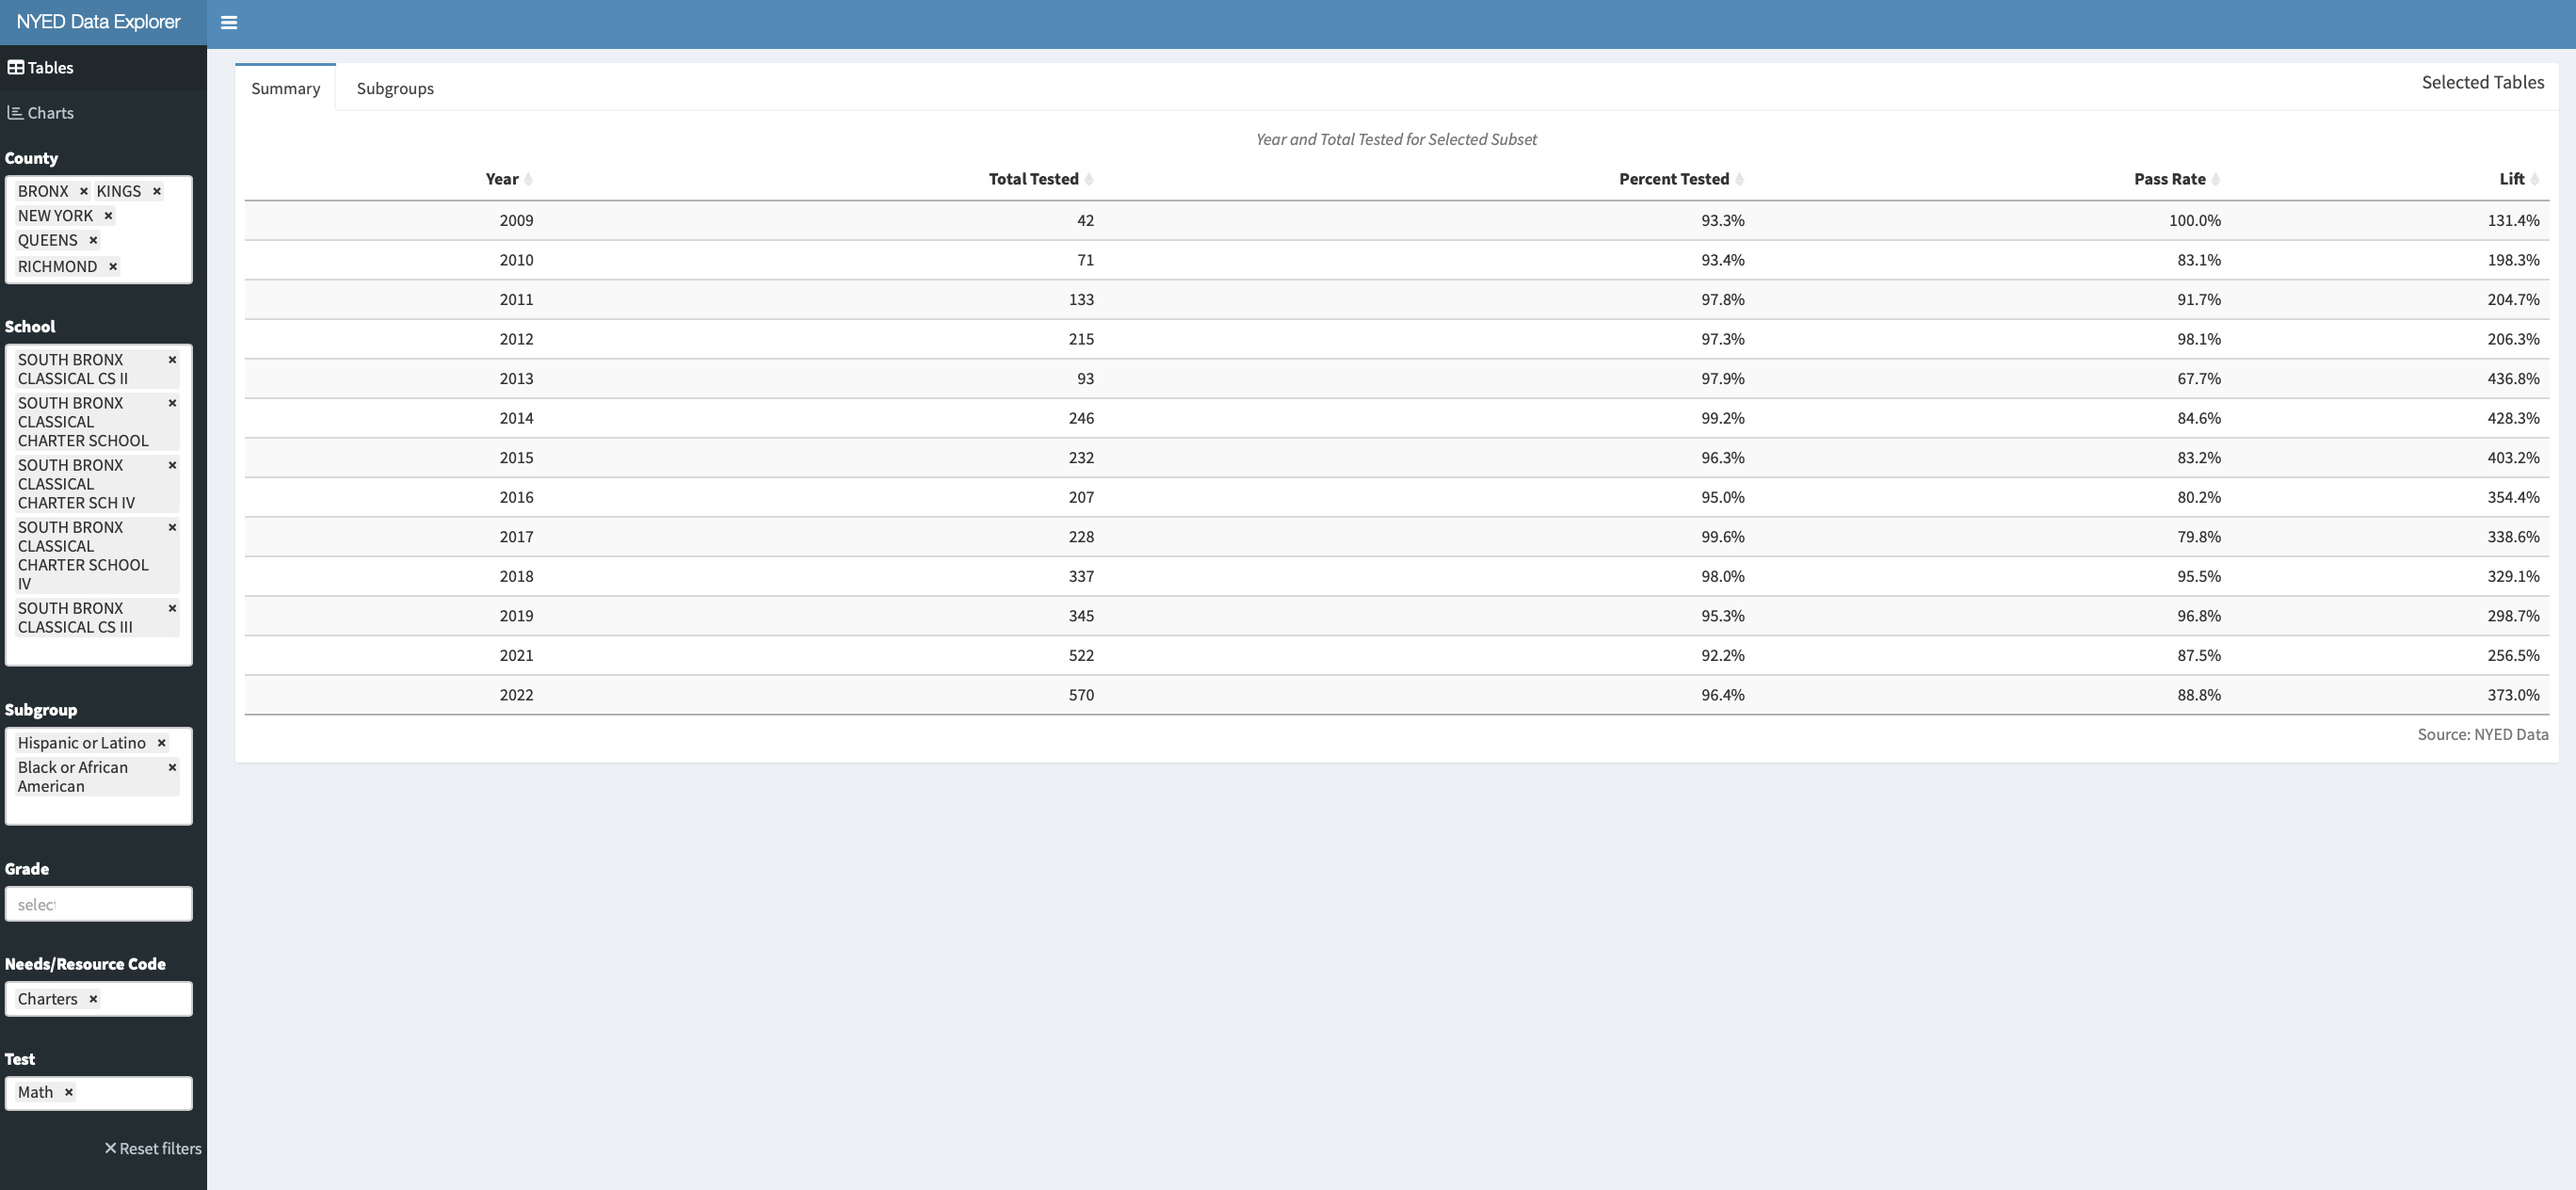 NYED Data Explorer filtered for African American and Latino students at South Bronx Classical